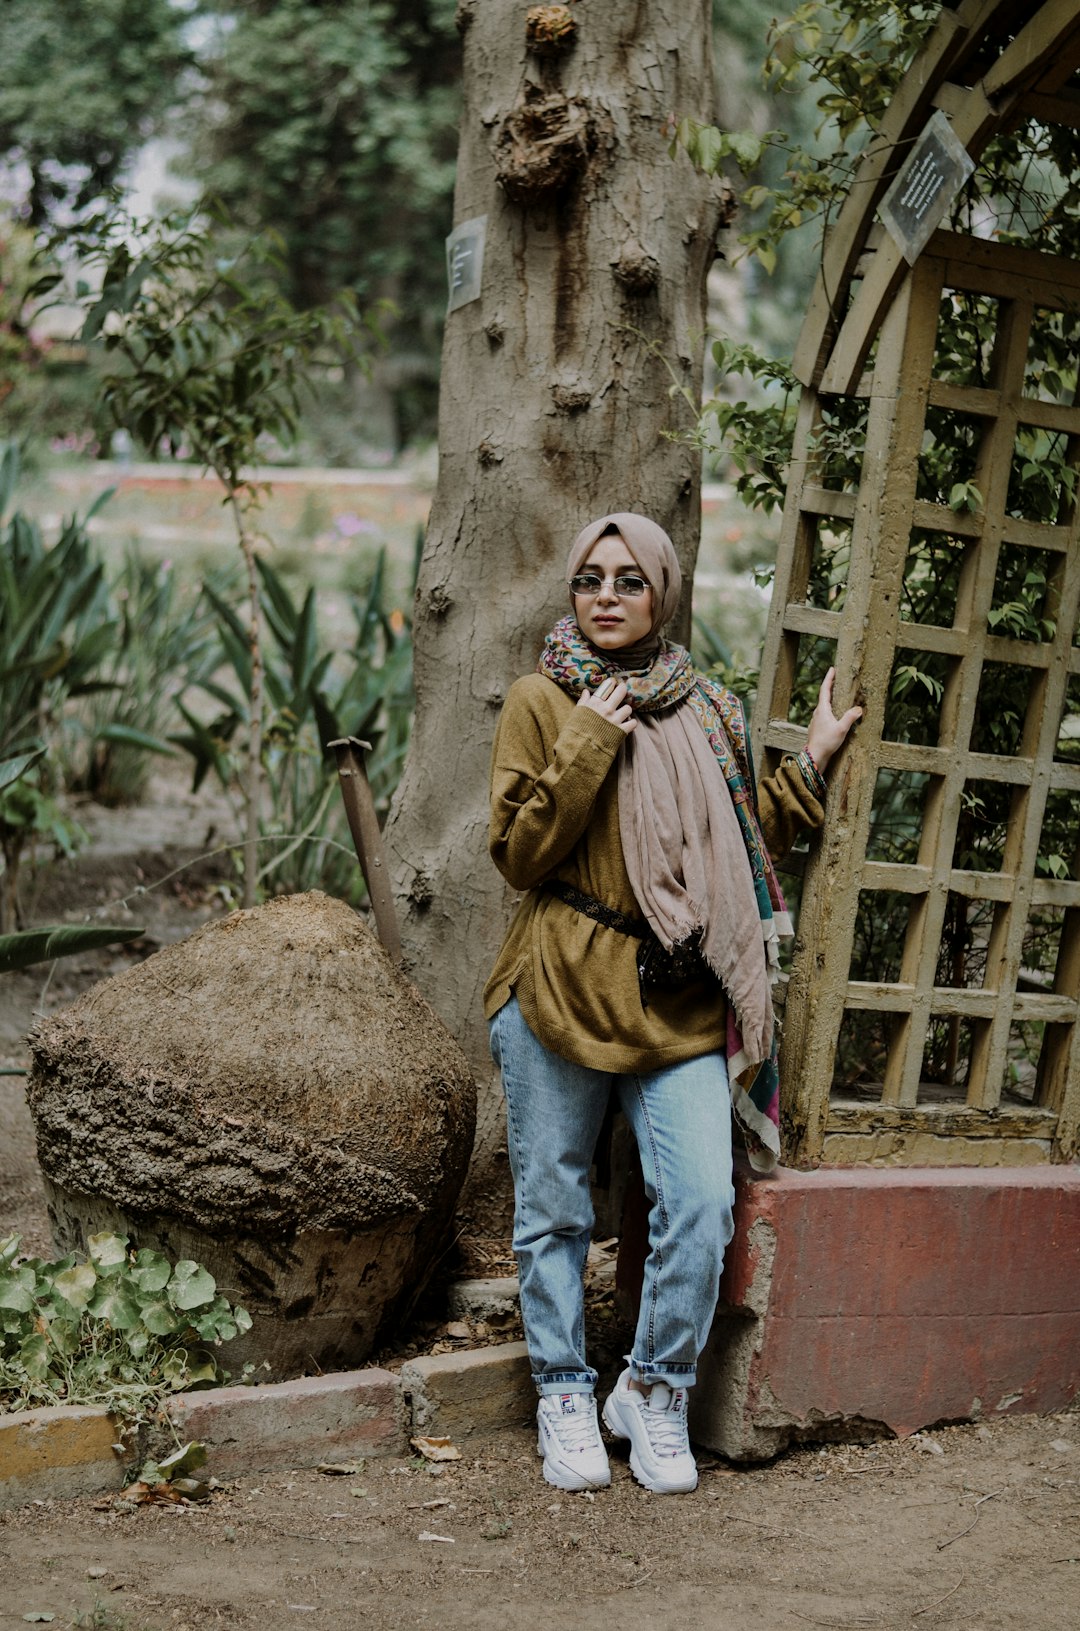 woman wearing brown long-sleeved shirt and gray headscarf leaning on tree